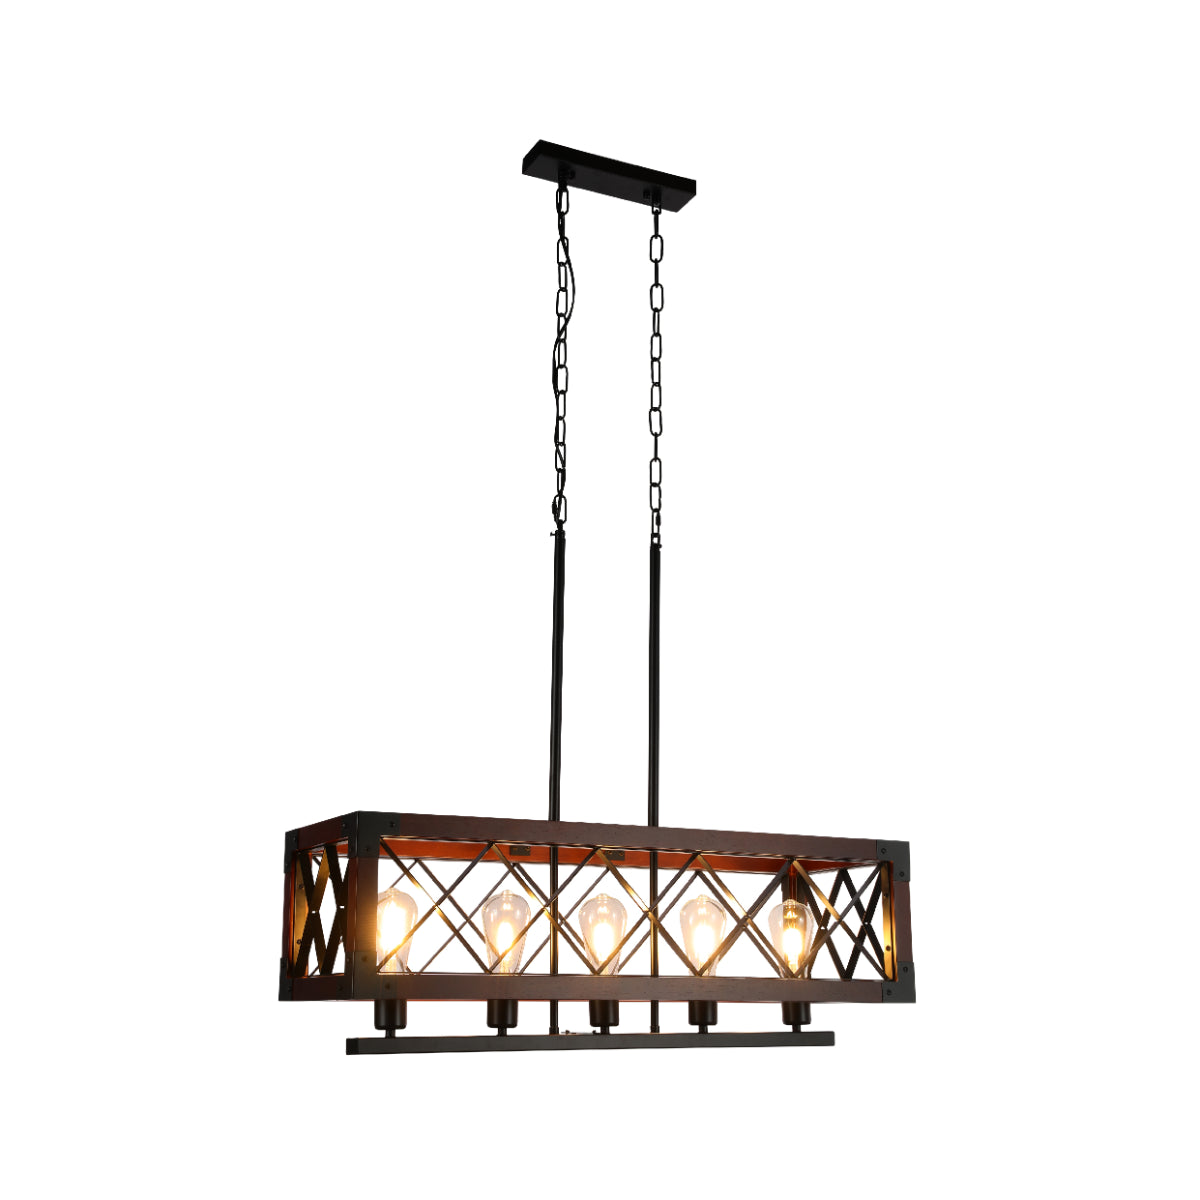 Main image of Rustic Rectangular Cage Chandelier - Wood Accent